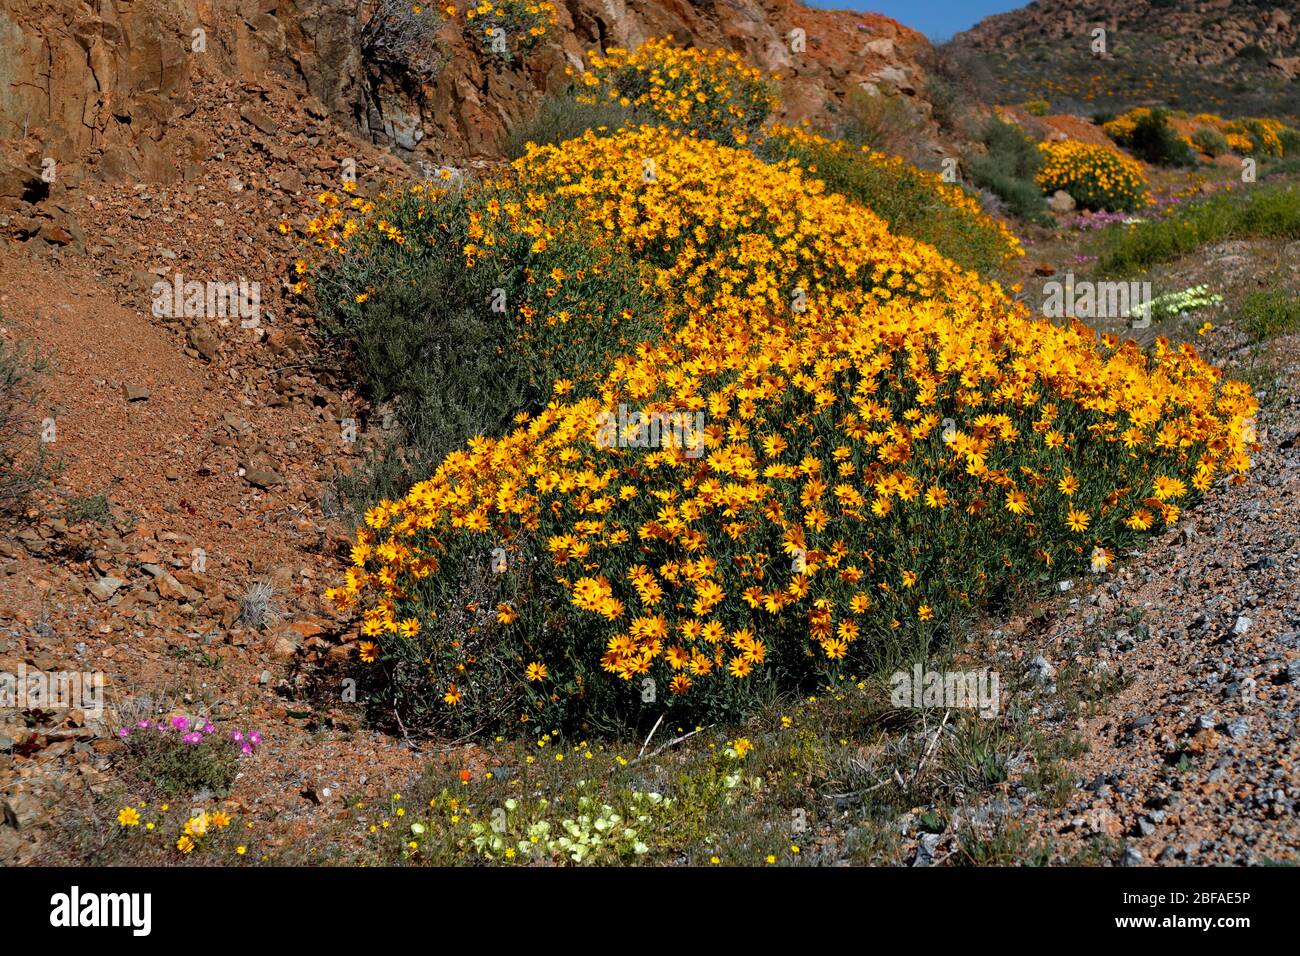 Wild flowers and scenic views near Garies in Namaqualand, Northern Cape, South Africa Stock Photo